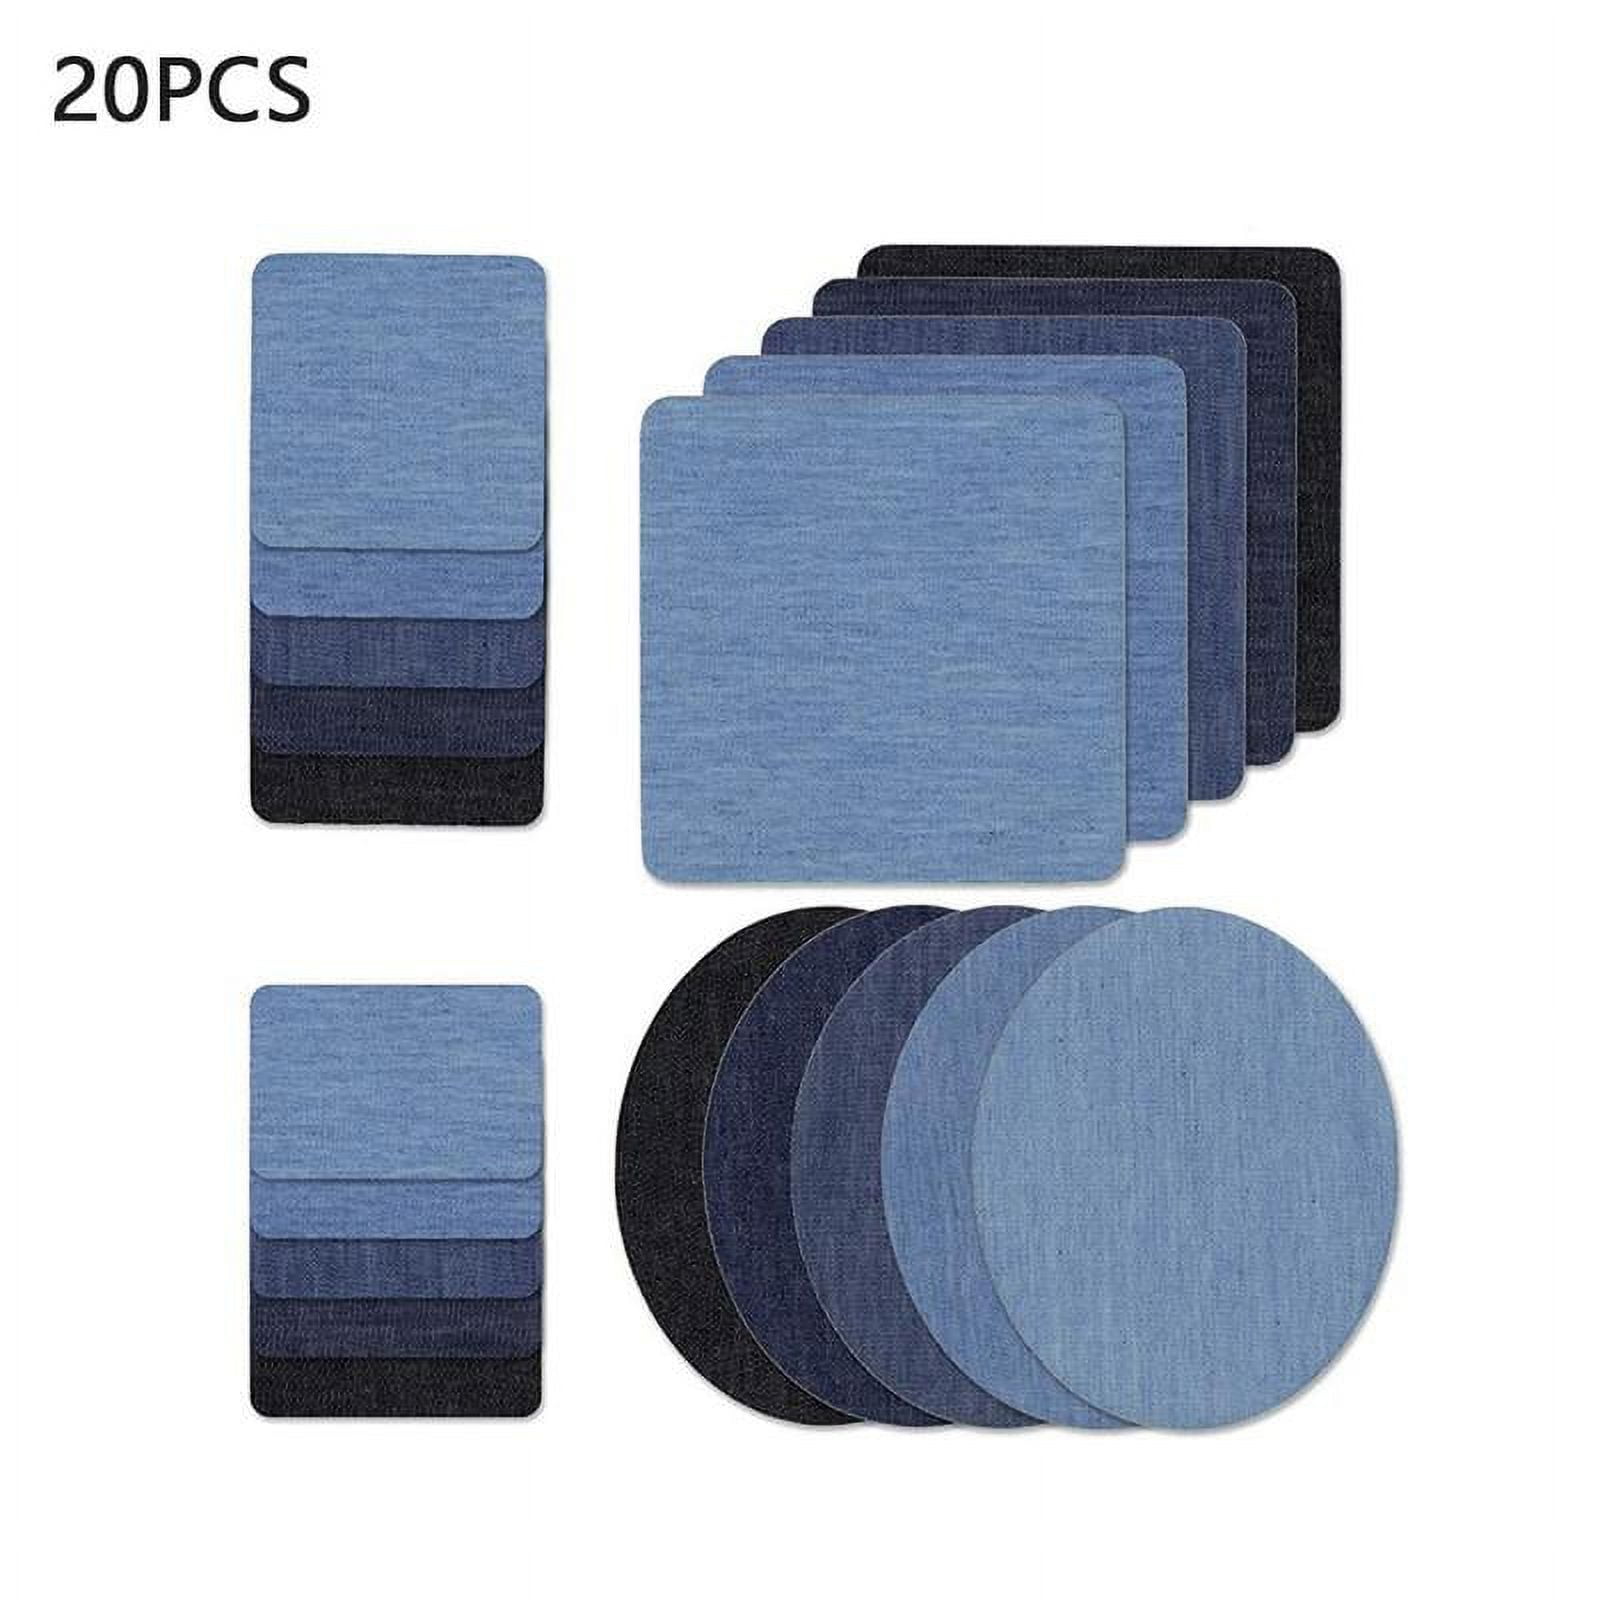 5 PCS Design Iron On Denim Fabric Patches Clothing Jeans Repair Kit Can Be  Cut